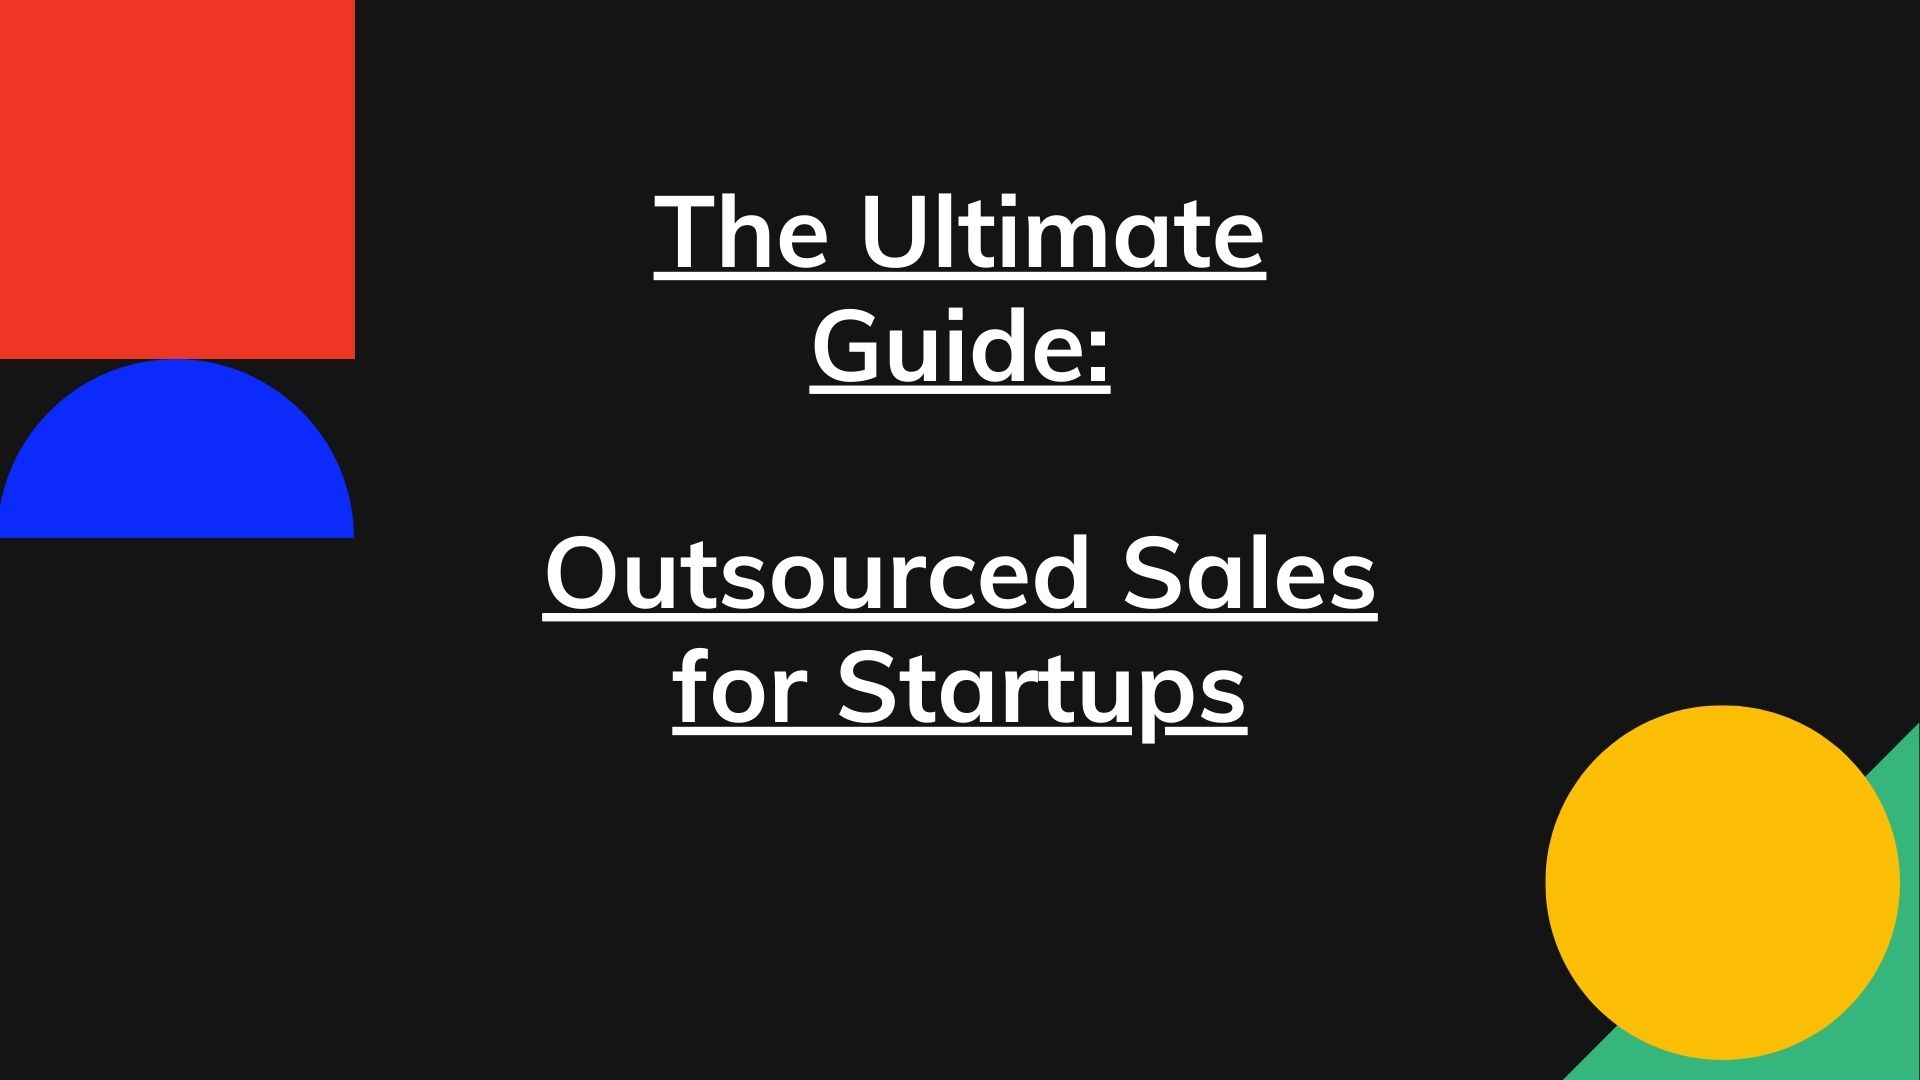 The Ultimate Guide: Outsourced Sales for Startups